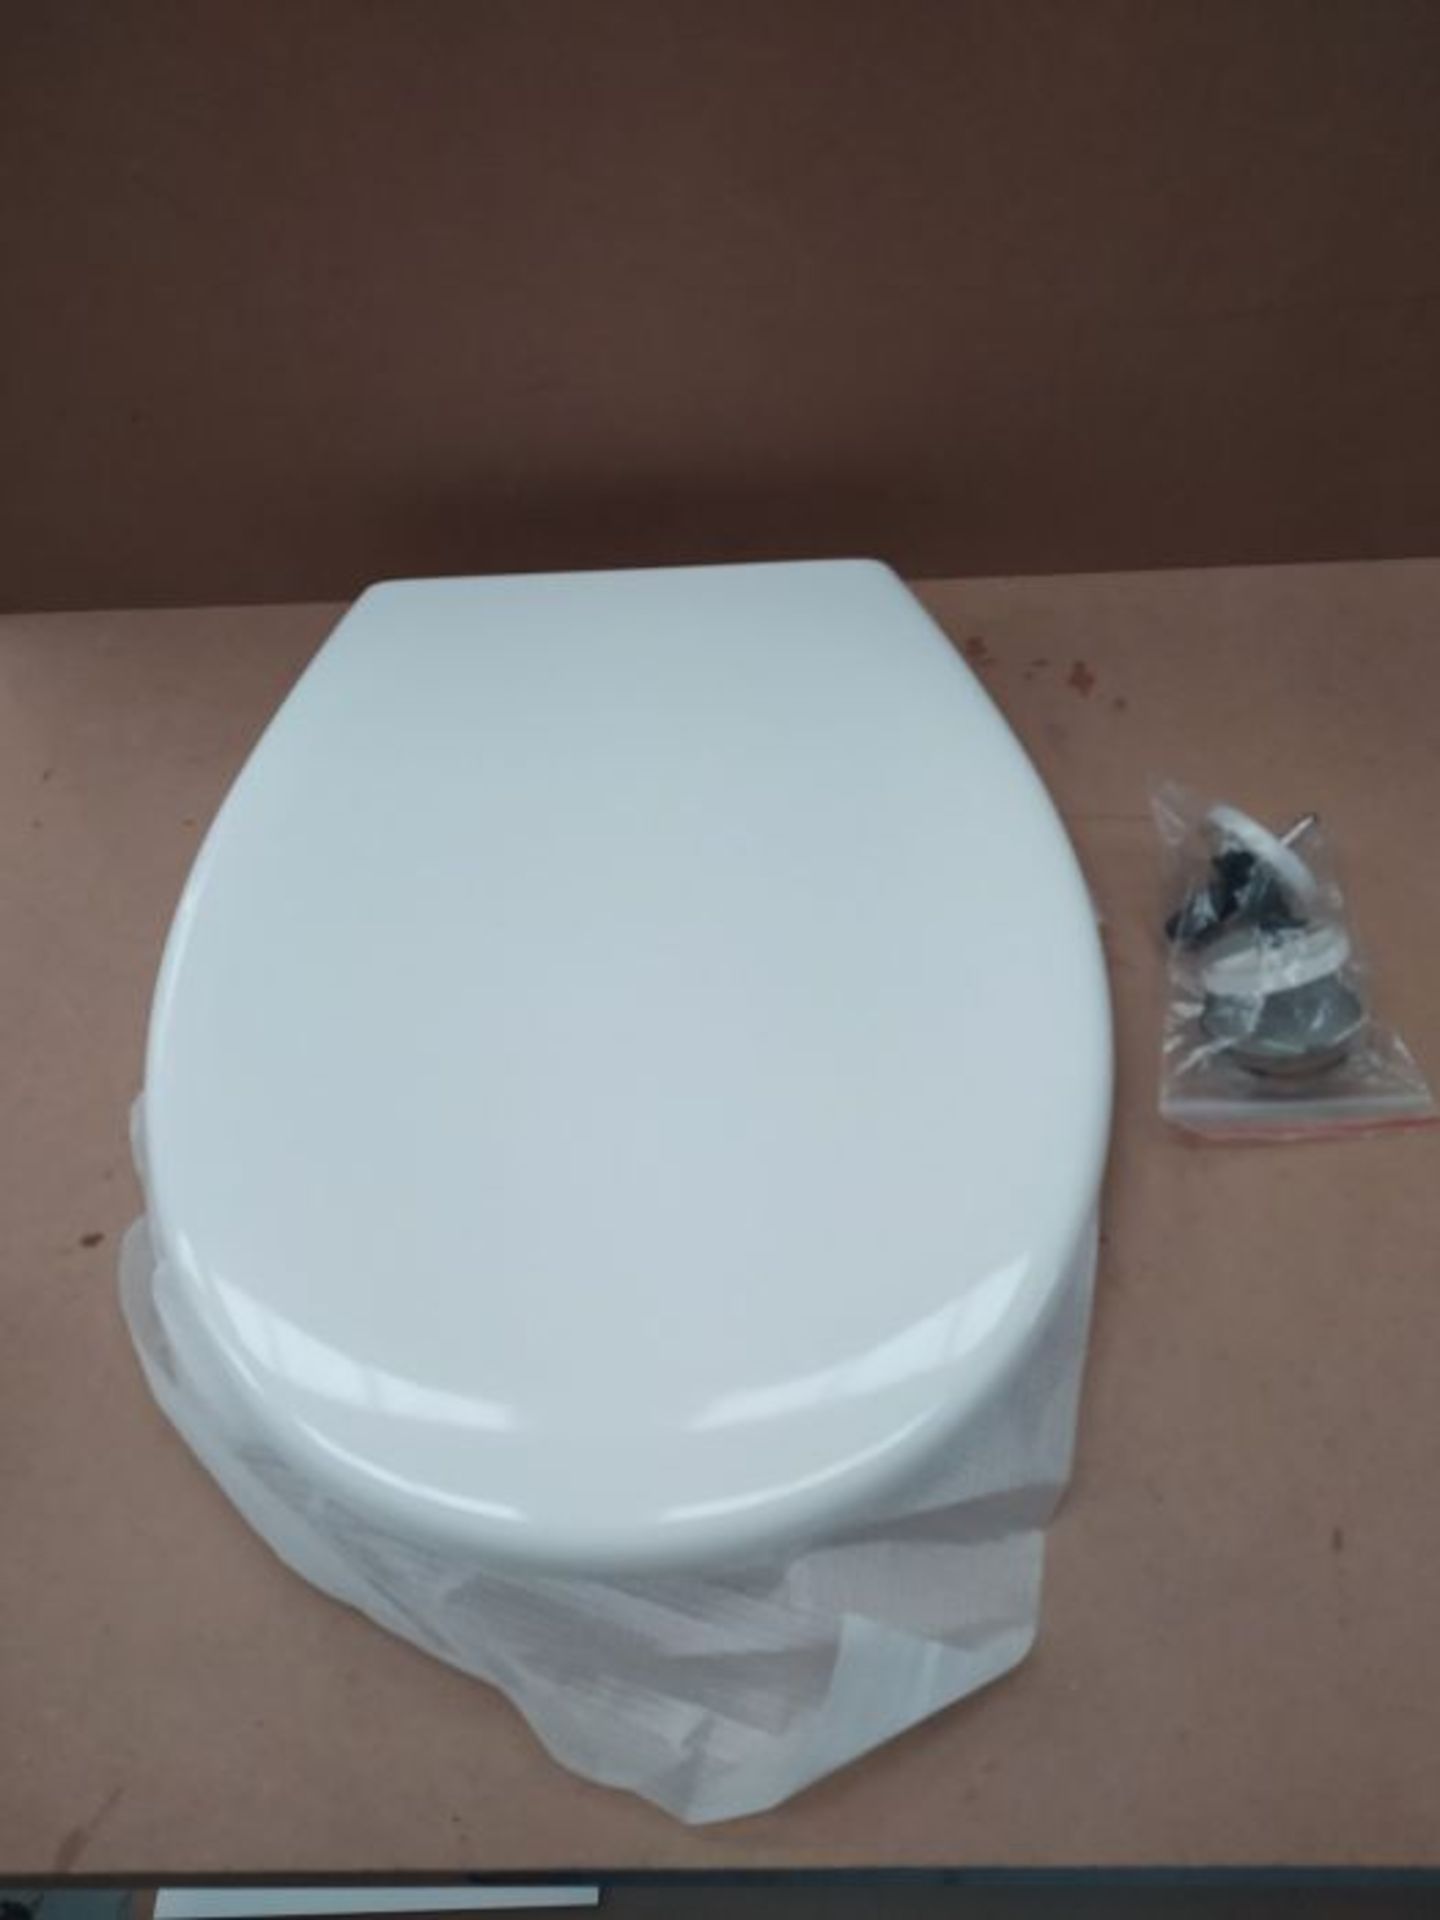 Toilet Seat featuring Soft-Close, Easy Clean, Top Fixing Hinges / OVAL LOO SEAT COVER - Image 3 of 3